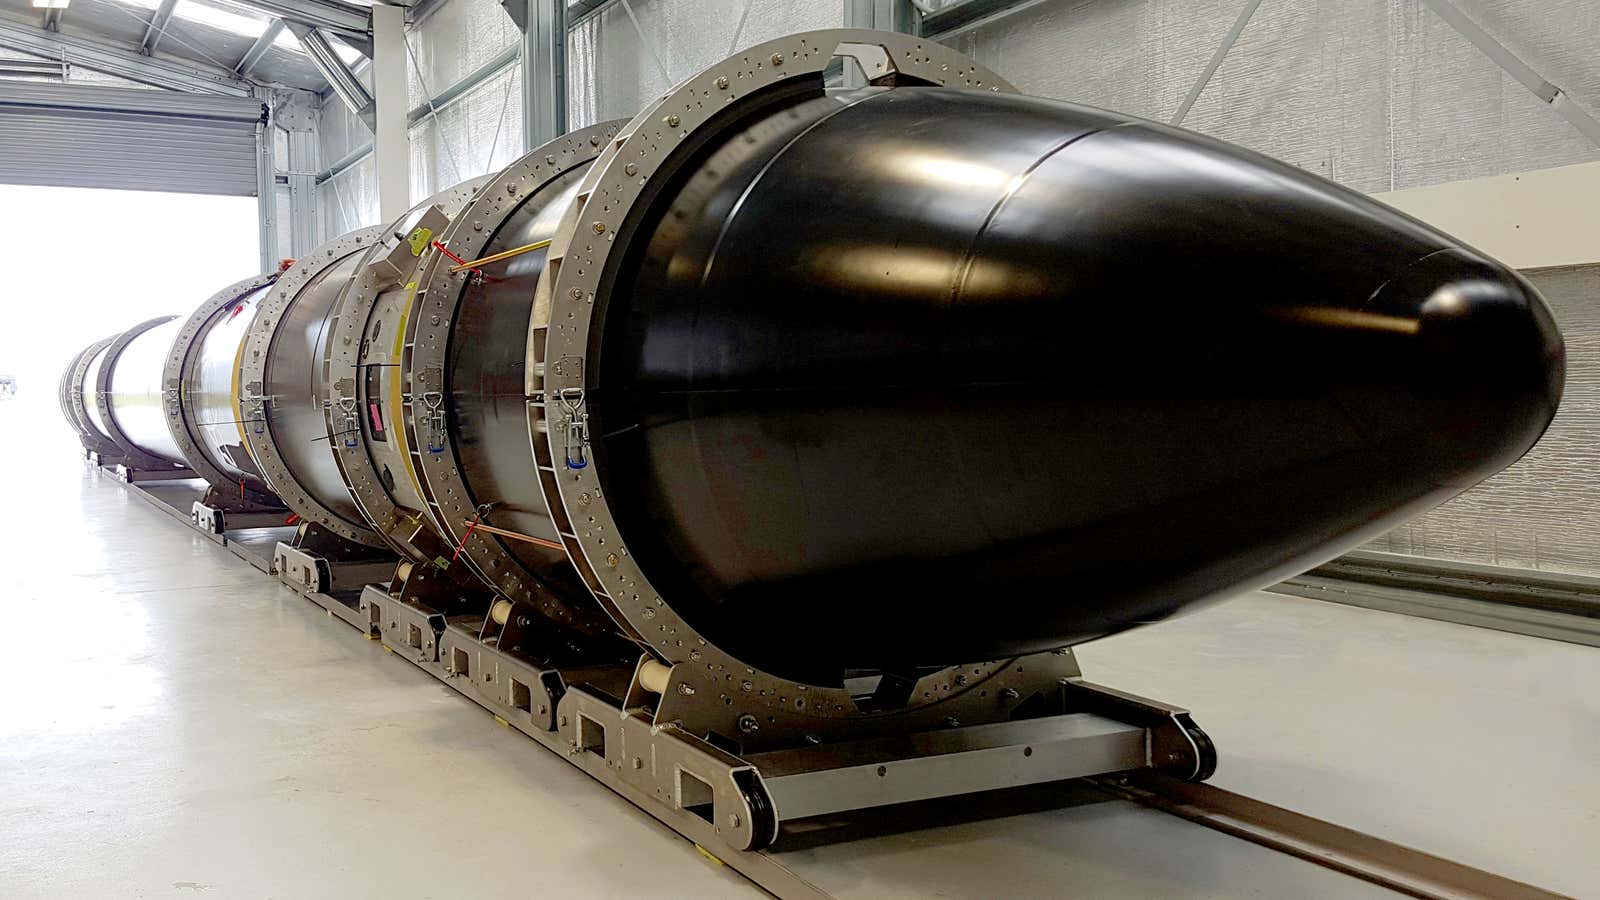 The Electron rocket at rest at Rocket Lab’s New Zealand launch site.